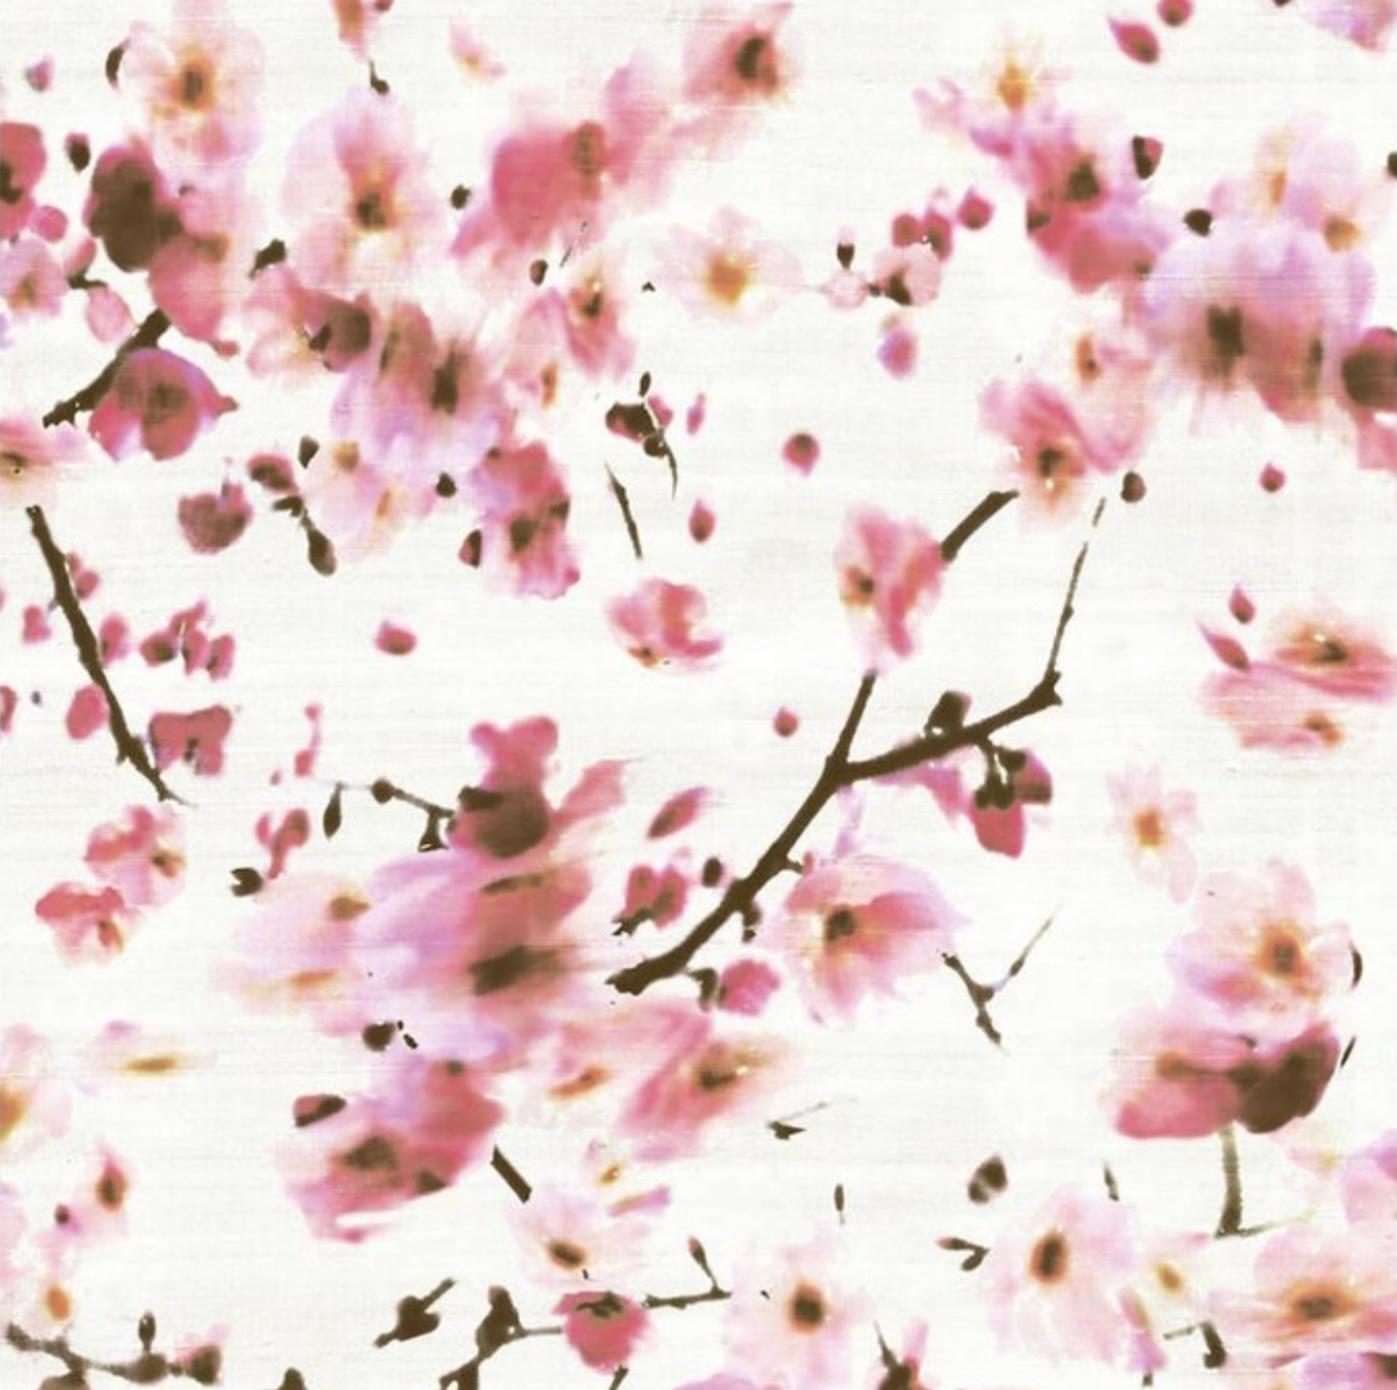 French wallpaper by Elitis ‘Kandy’ Sakura cherry blossom floral watercolor silk
Are you passionate? Is a beautiful, abstract, floral wallpaper design on a vegan silk. The design represents a water color painting. Kandy refers to the sacred Buddhist